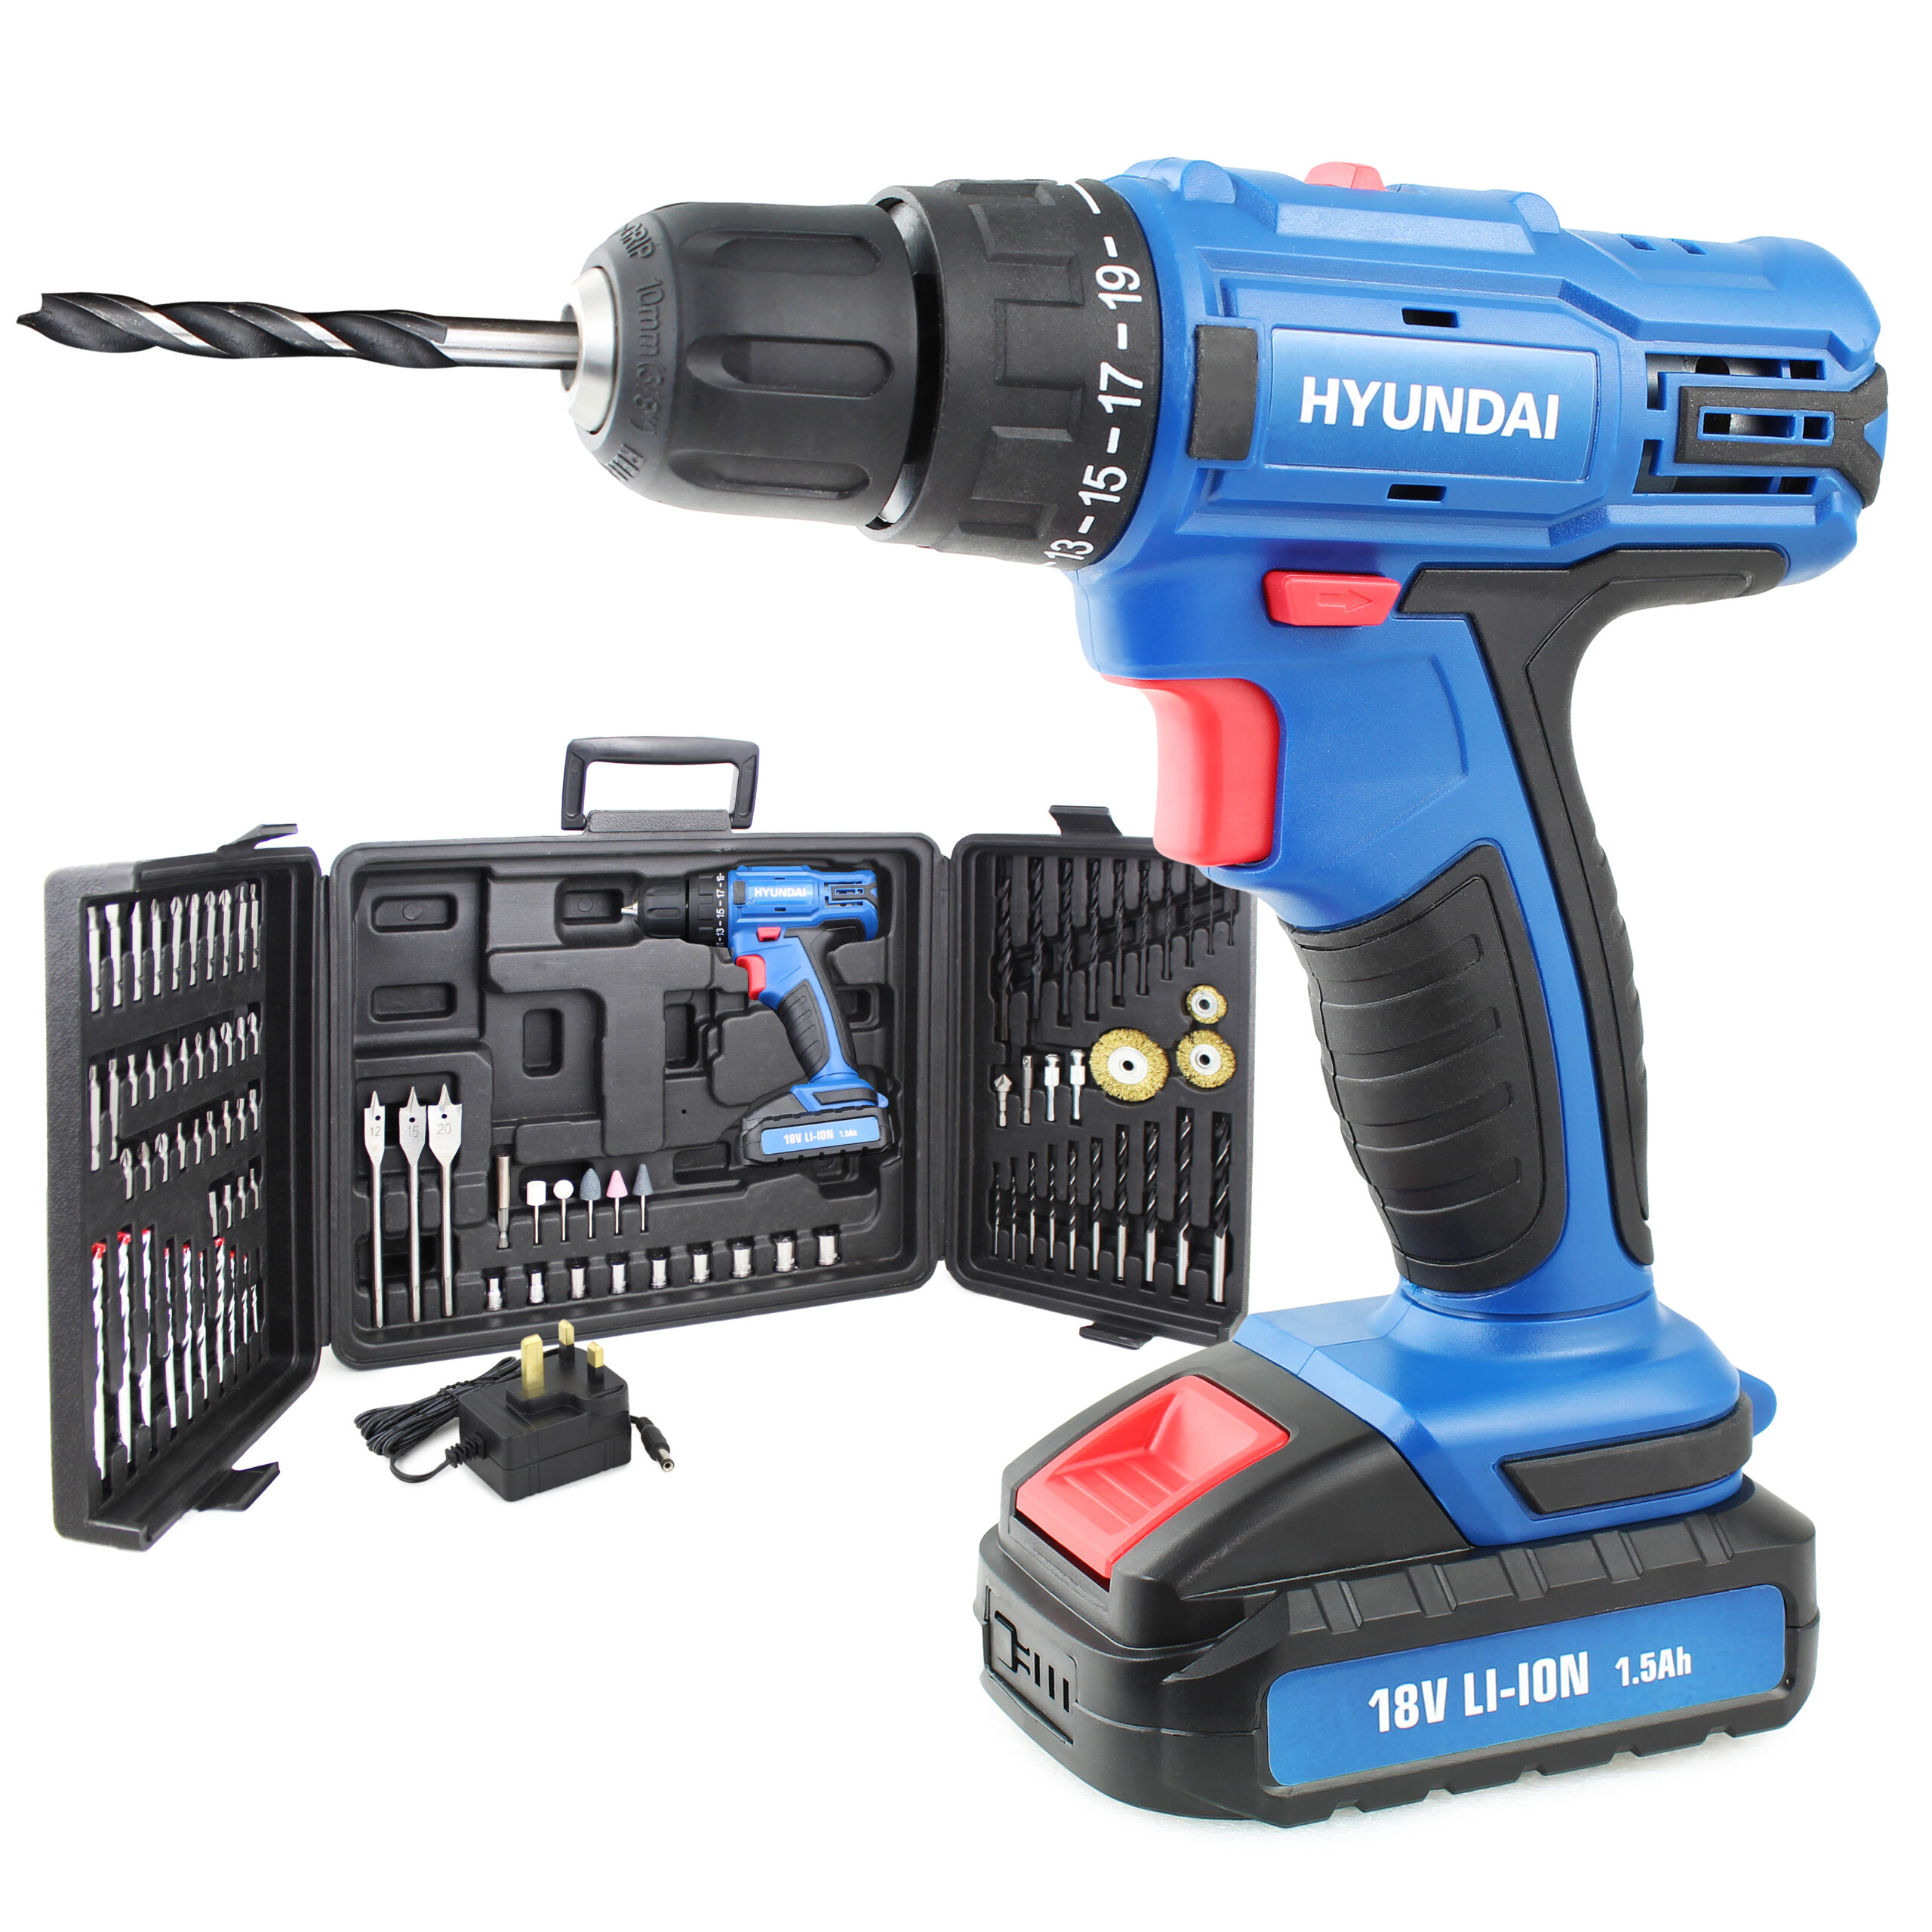 UK Suppliers Hyundai 18v 1.5AH Li-Ion Cordless Drill with 54 Piece Drill Accessory Kit 